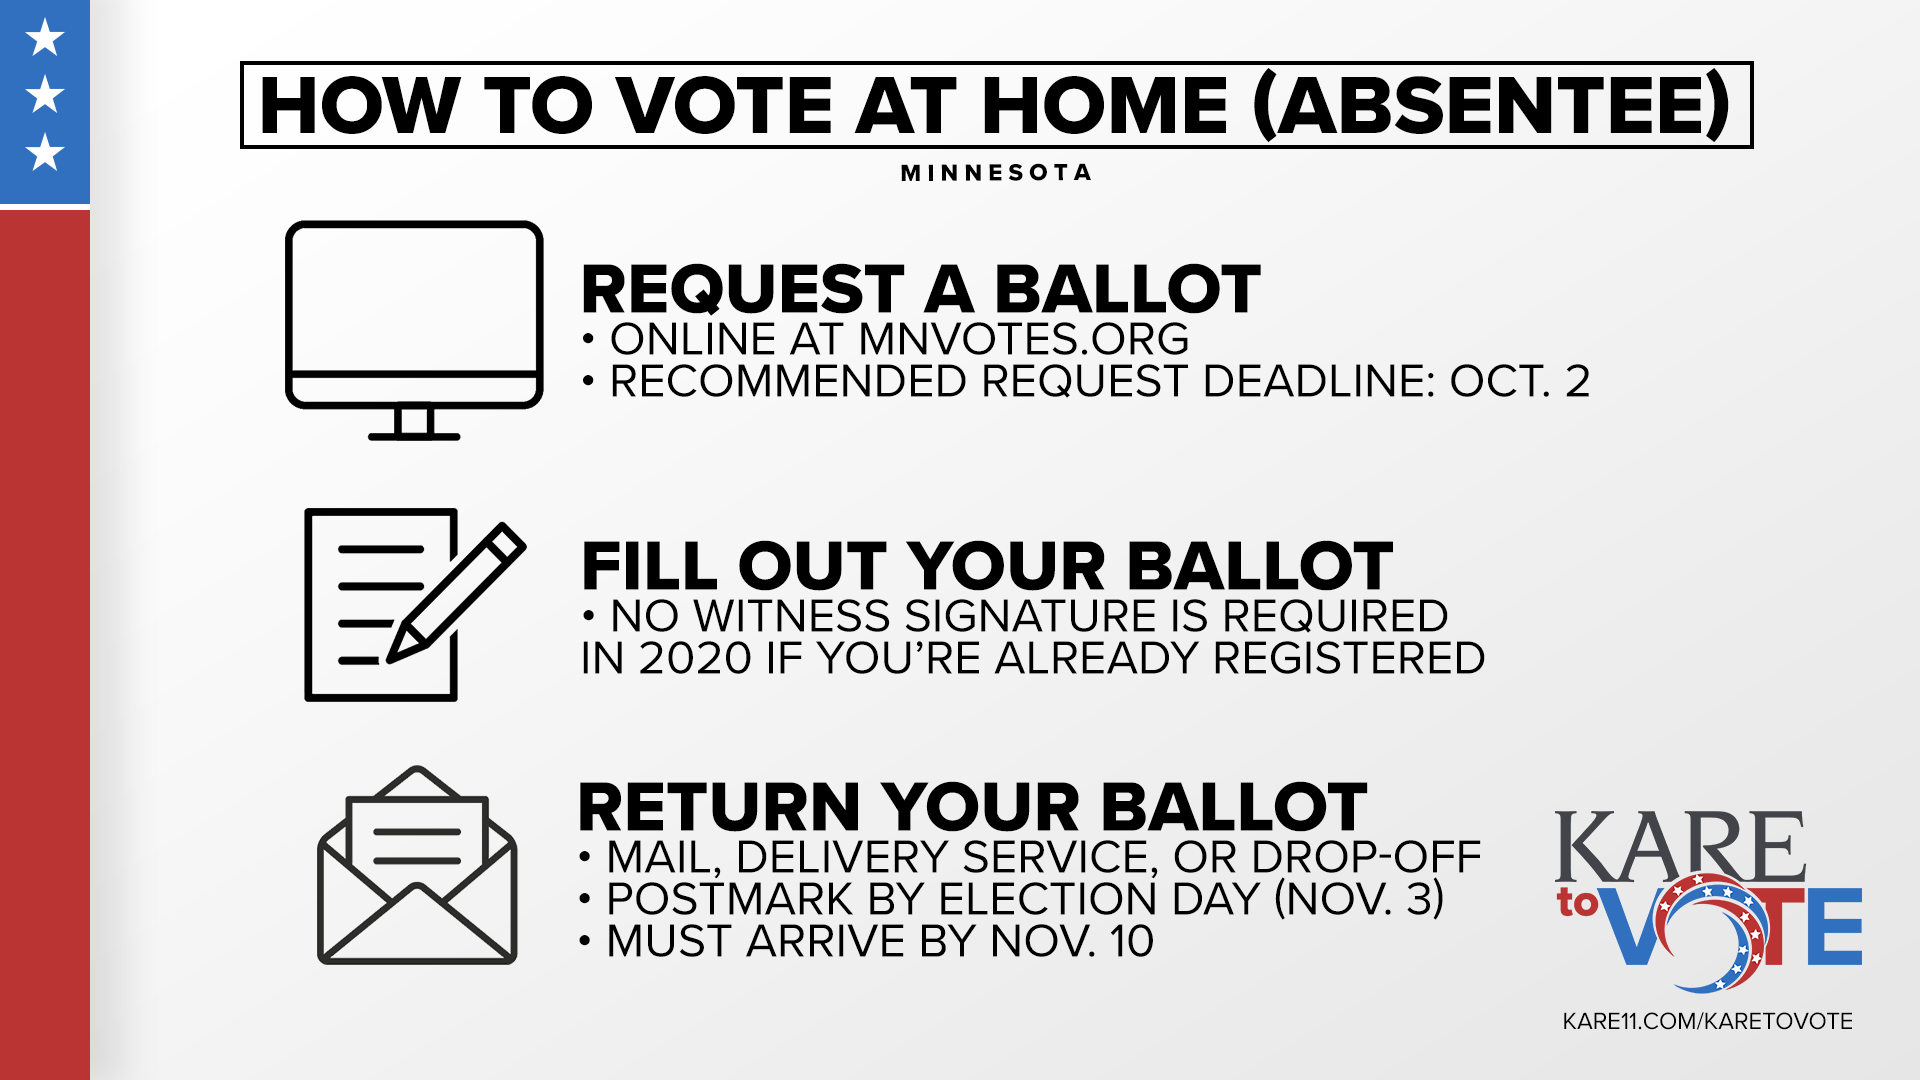 Minnesota voters have to apply to receive an absentee ballot. In 2020, ballots have to be postmarked by Election Day, and arrive by Nov. 10.